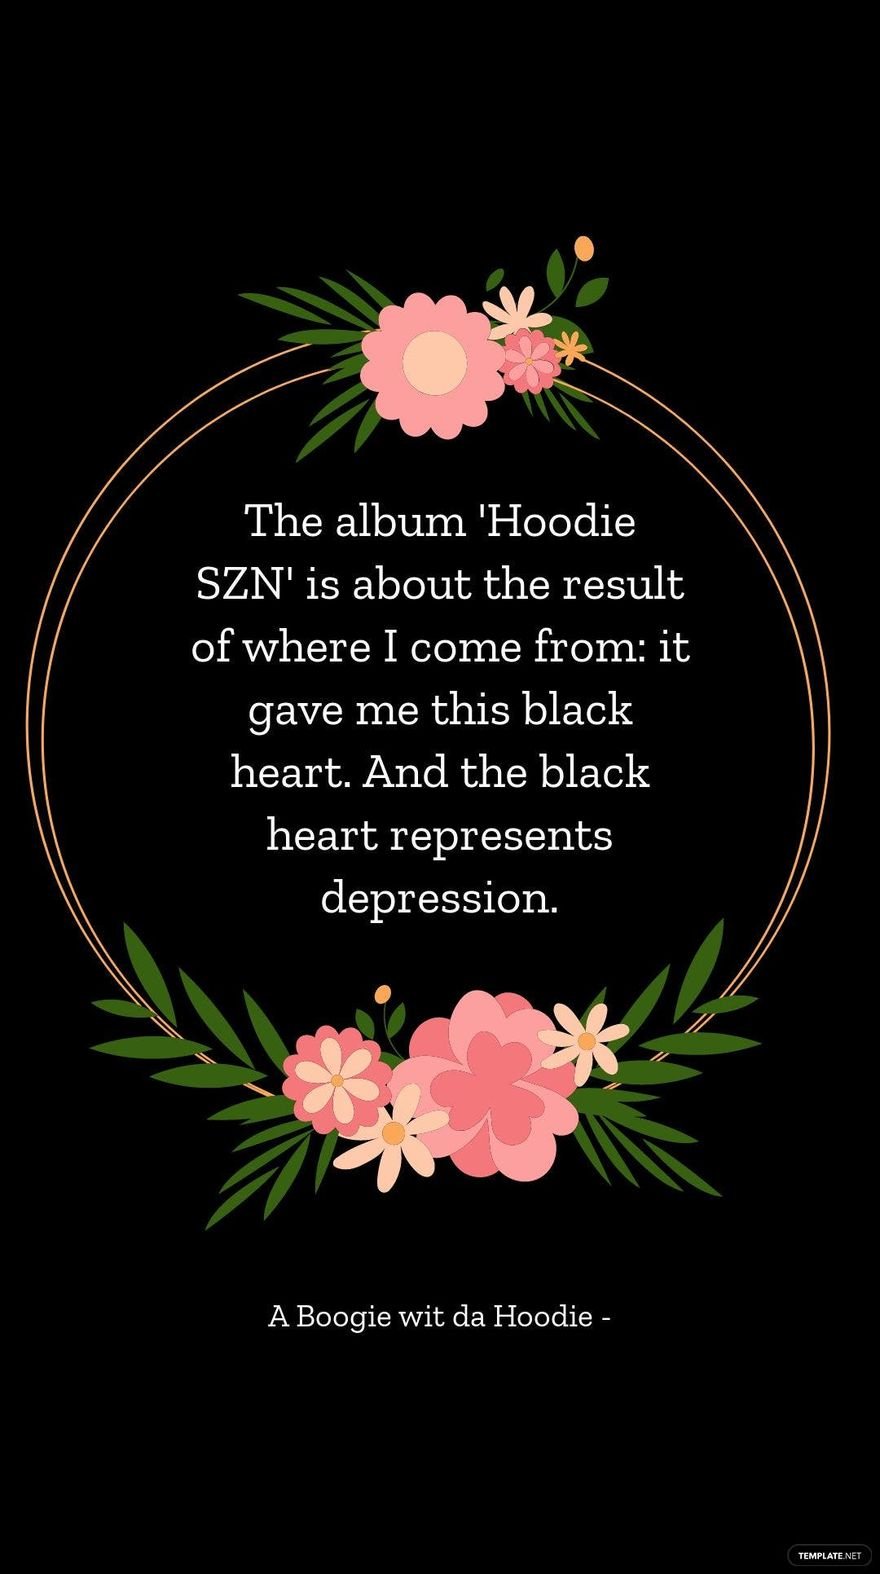 A Boogie wit da Hoodie  The album Hoodie SZN is about the result of where I come from it gave me this black heart And the black heart represents depression